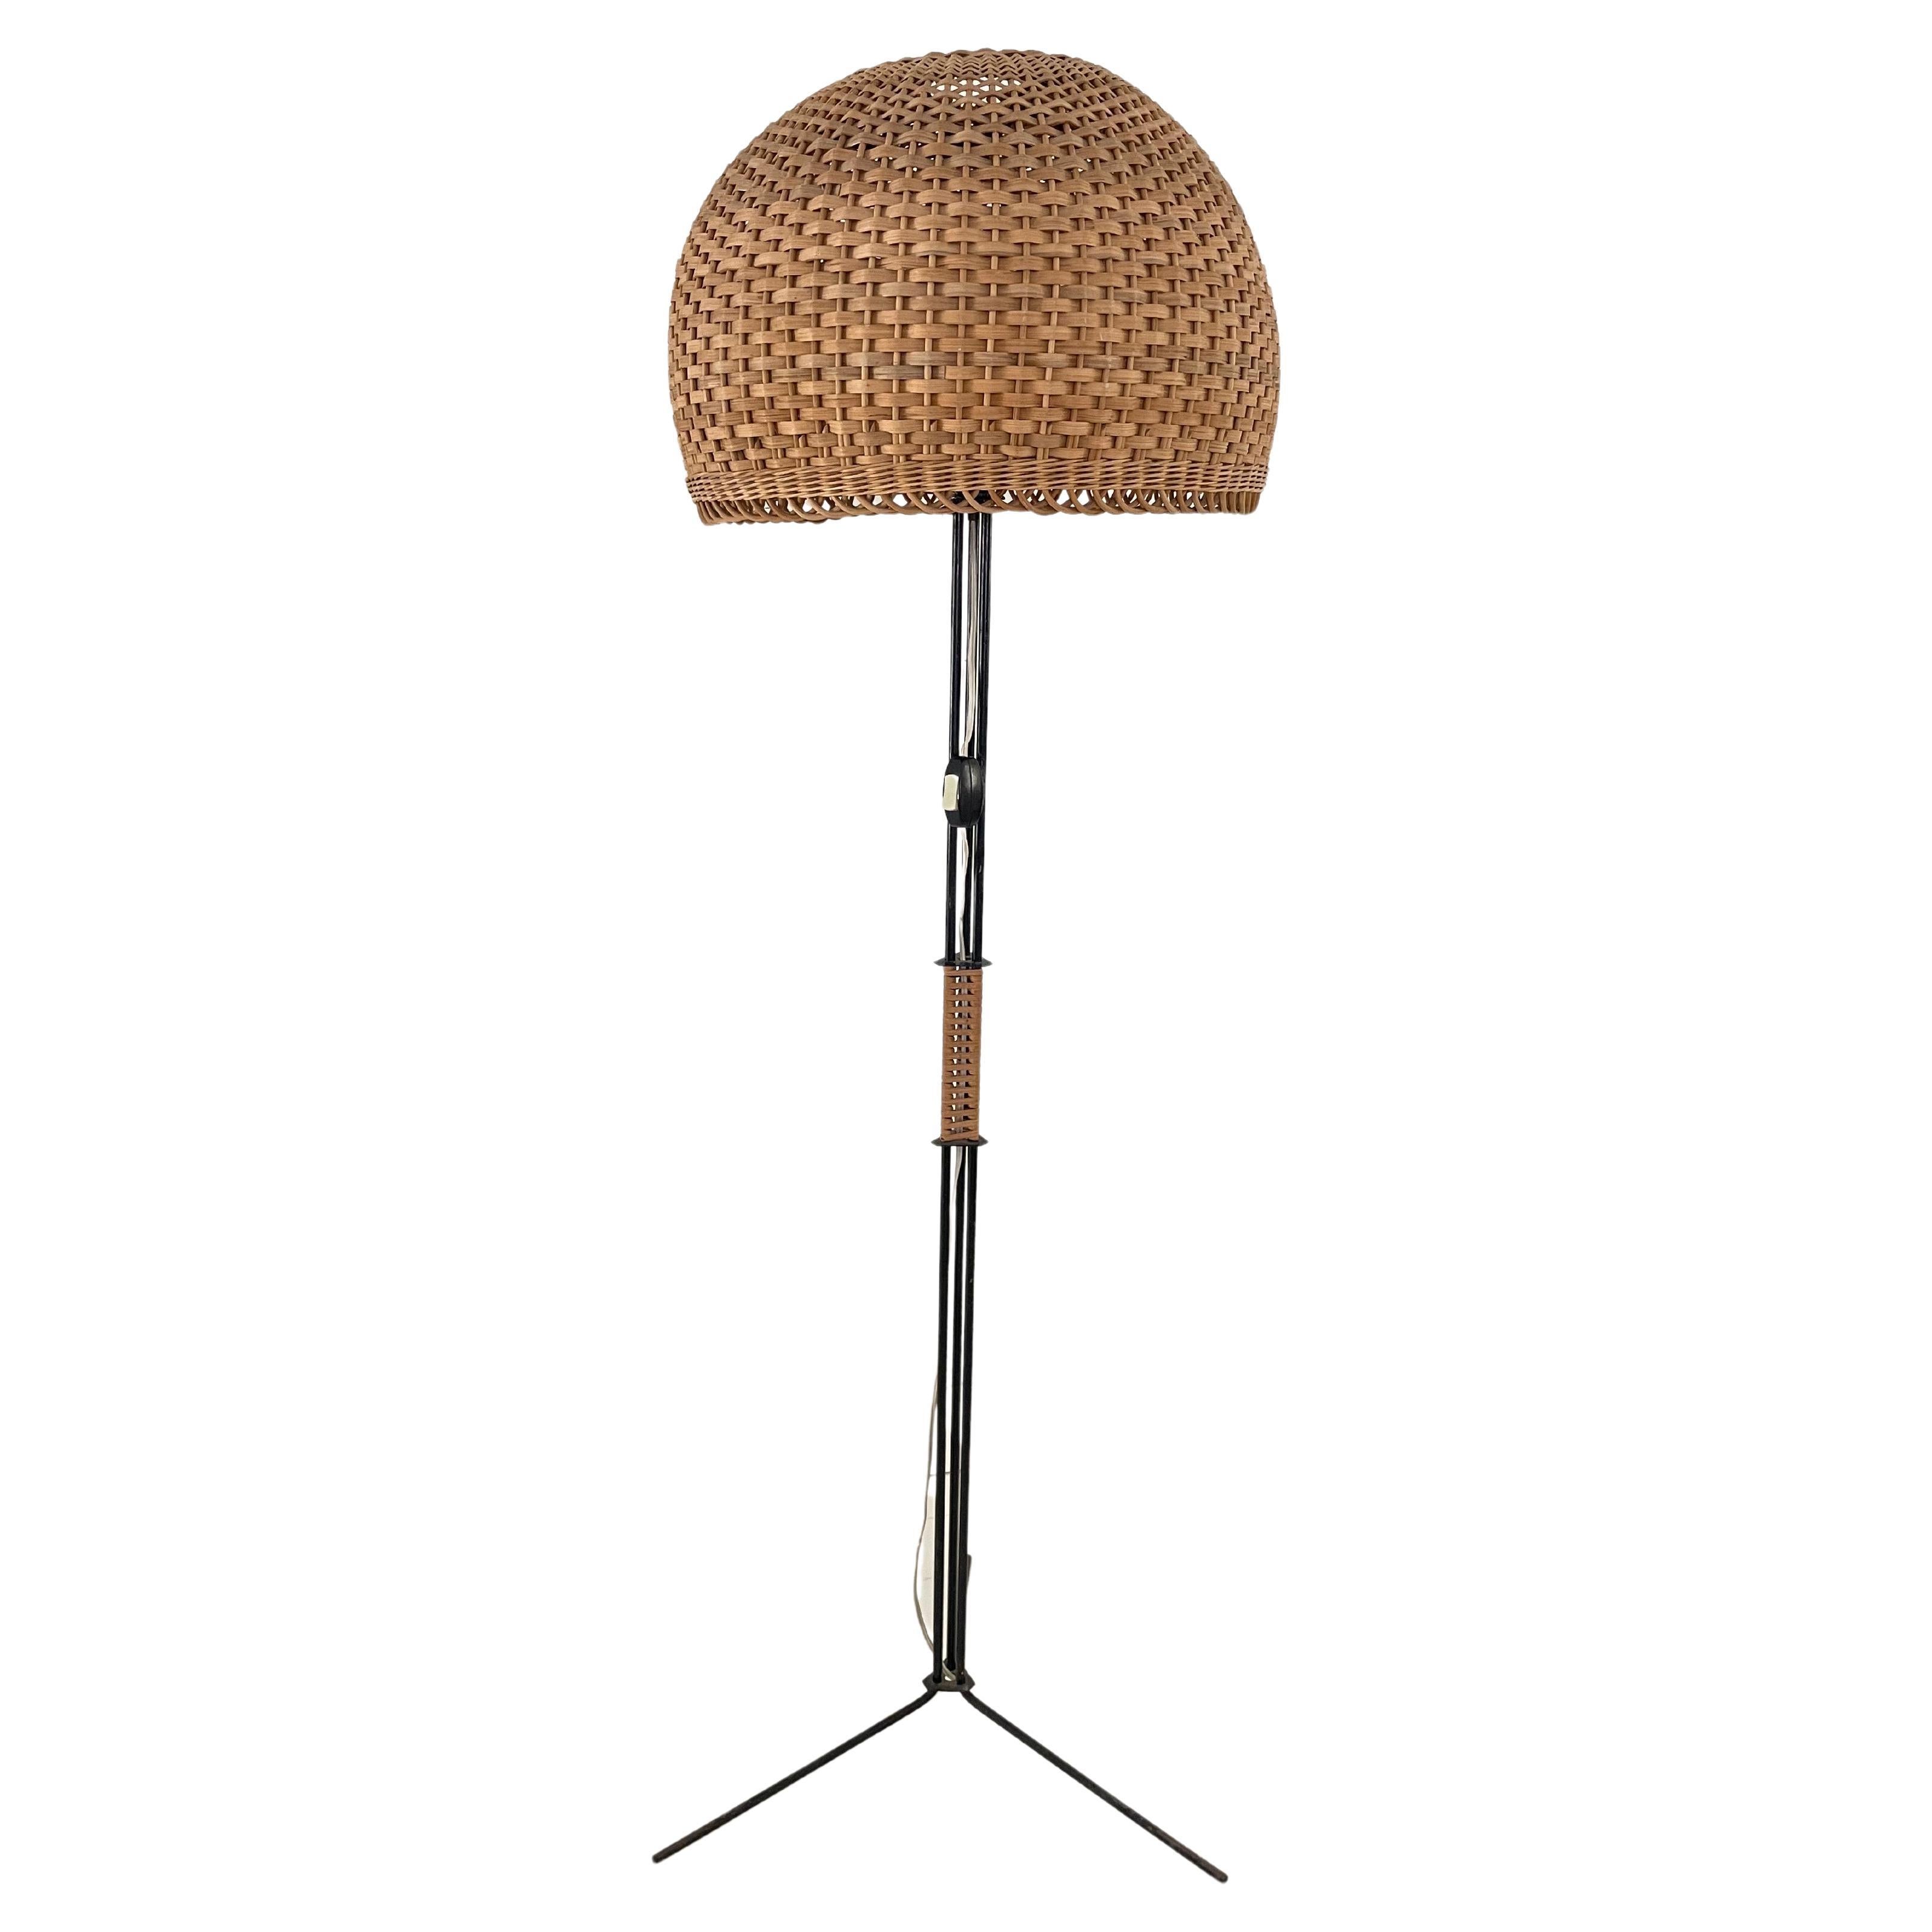 Unique  Modernist Iron and Wicker Floor Lamp, Hungary, 1950s For Sale